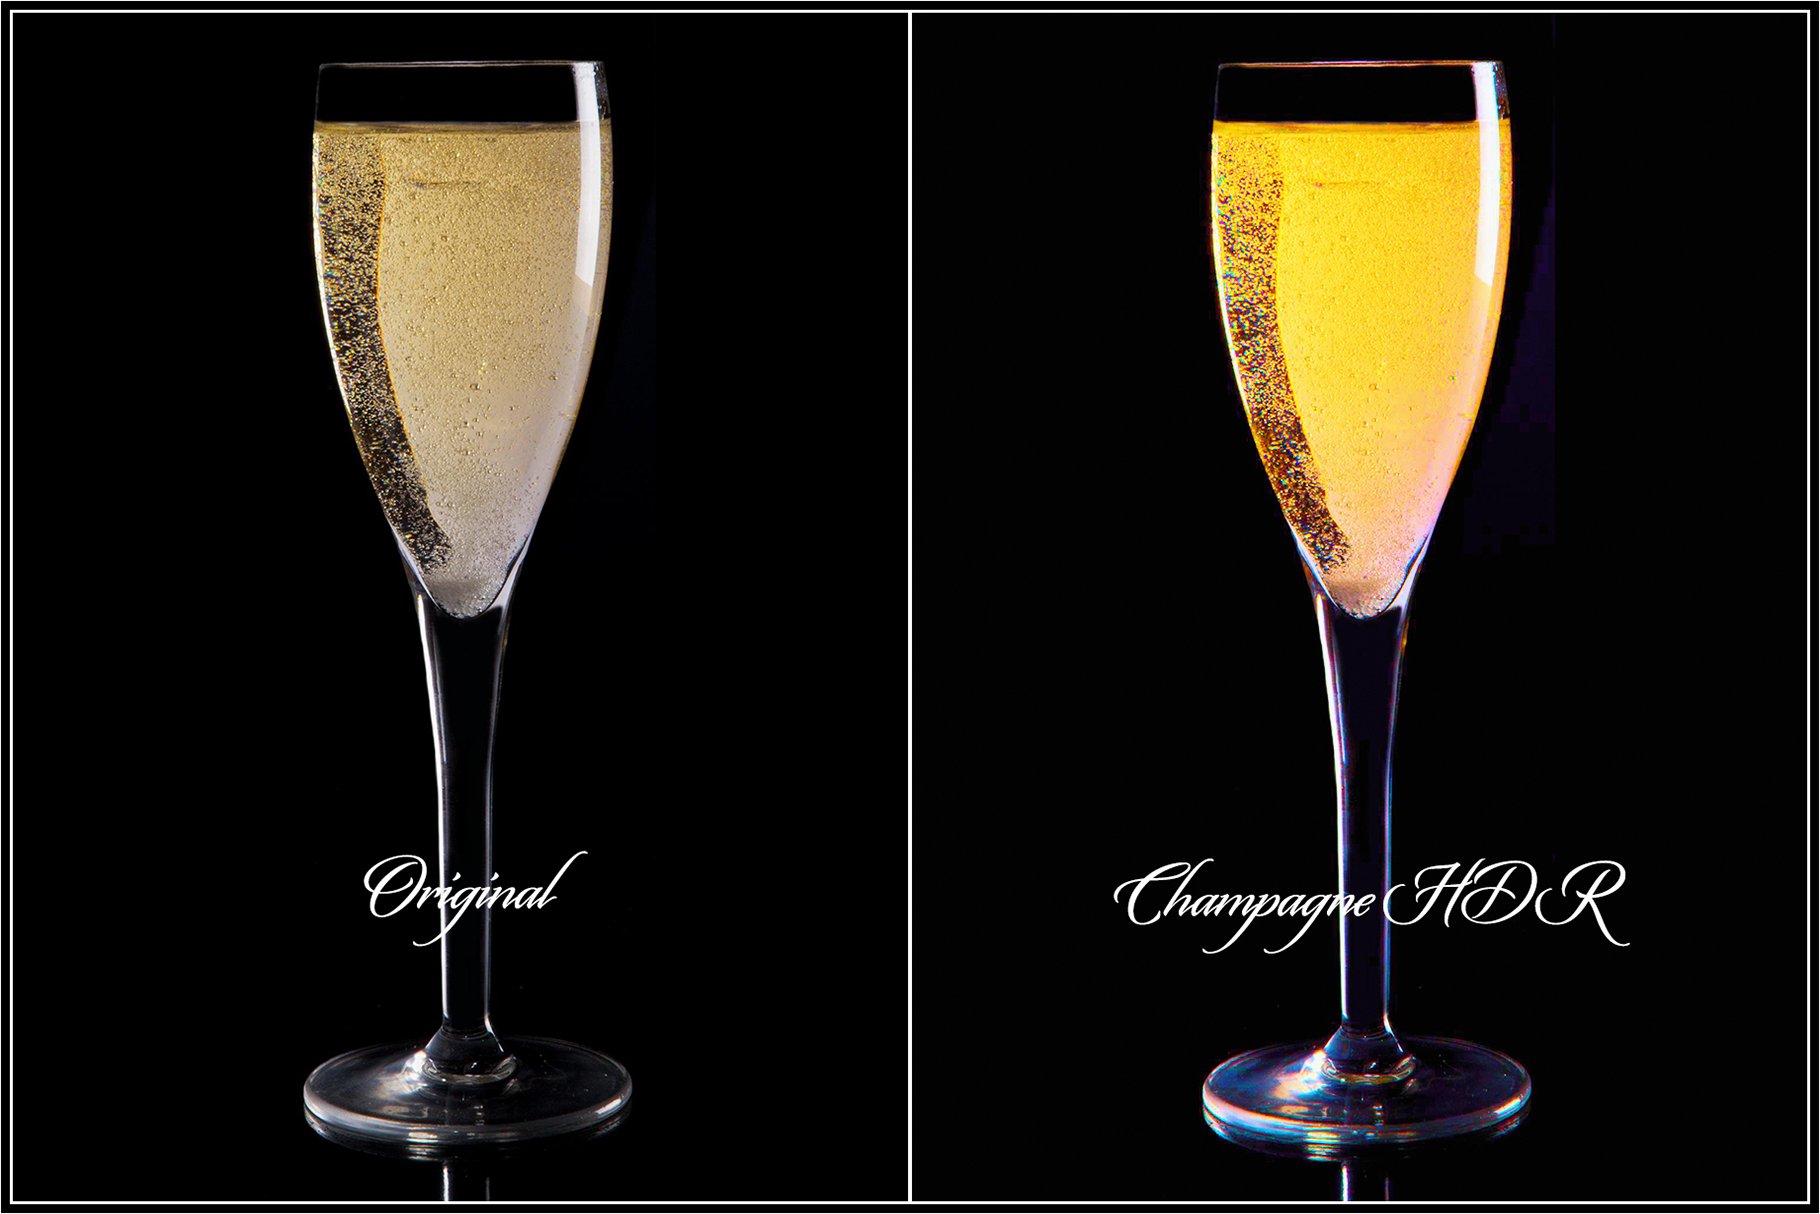 champagne hdr 672